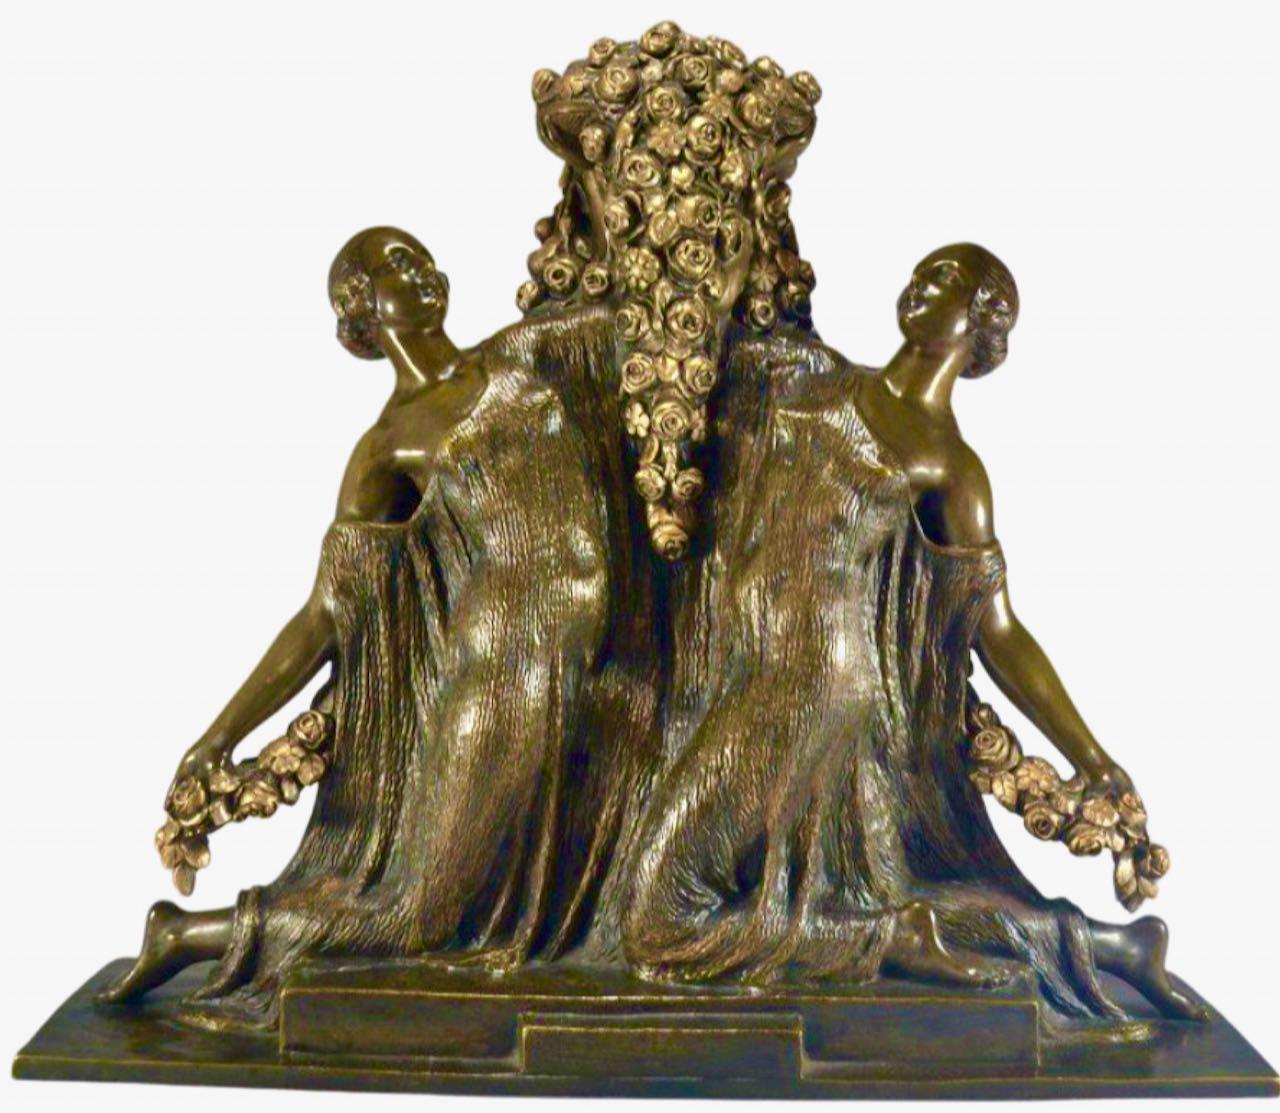 A very rare and impressive patinated bronze sculpture of two women holding an extensive array of rose garlands. Quality foundry and all original genuine patina. The piece is signed “Guirande” on the bronze, a well-known pseudonym for Joe Descomps.